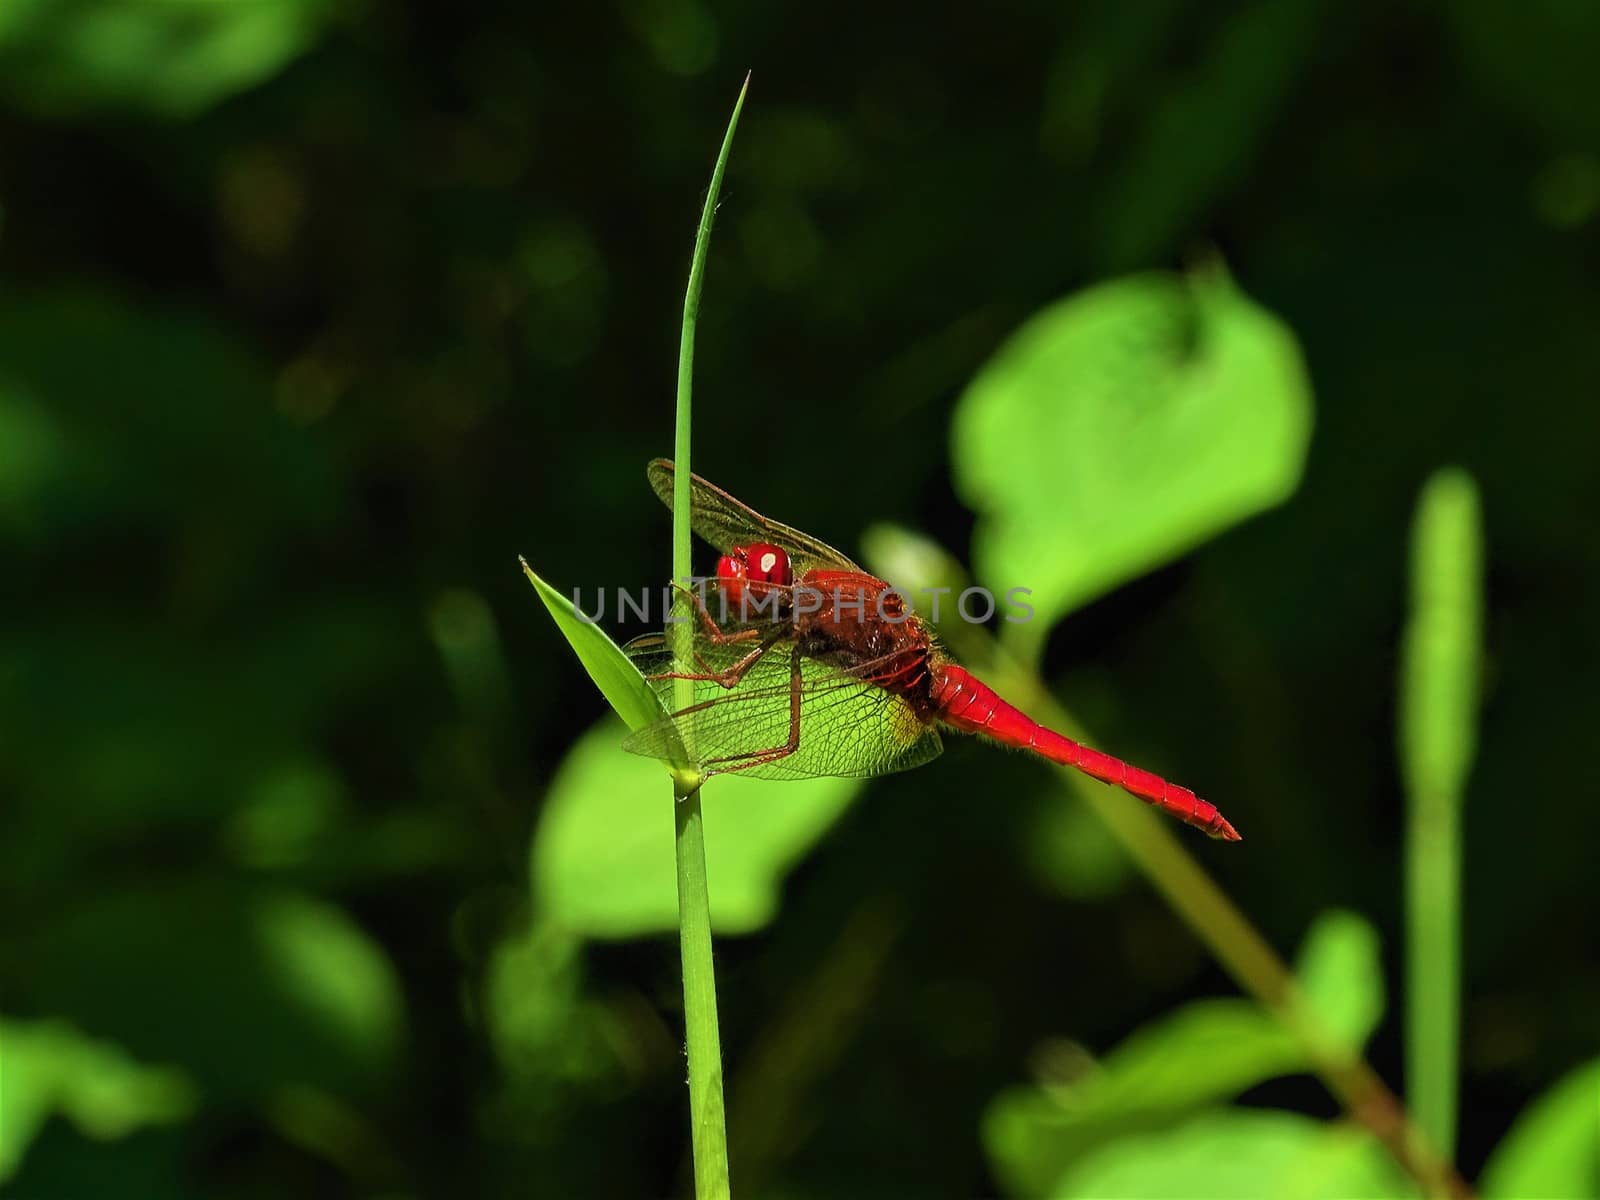 A scarlet dragonfly resting on a blade of grass